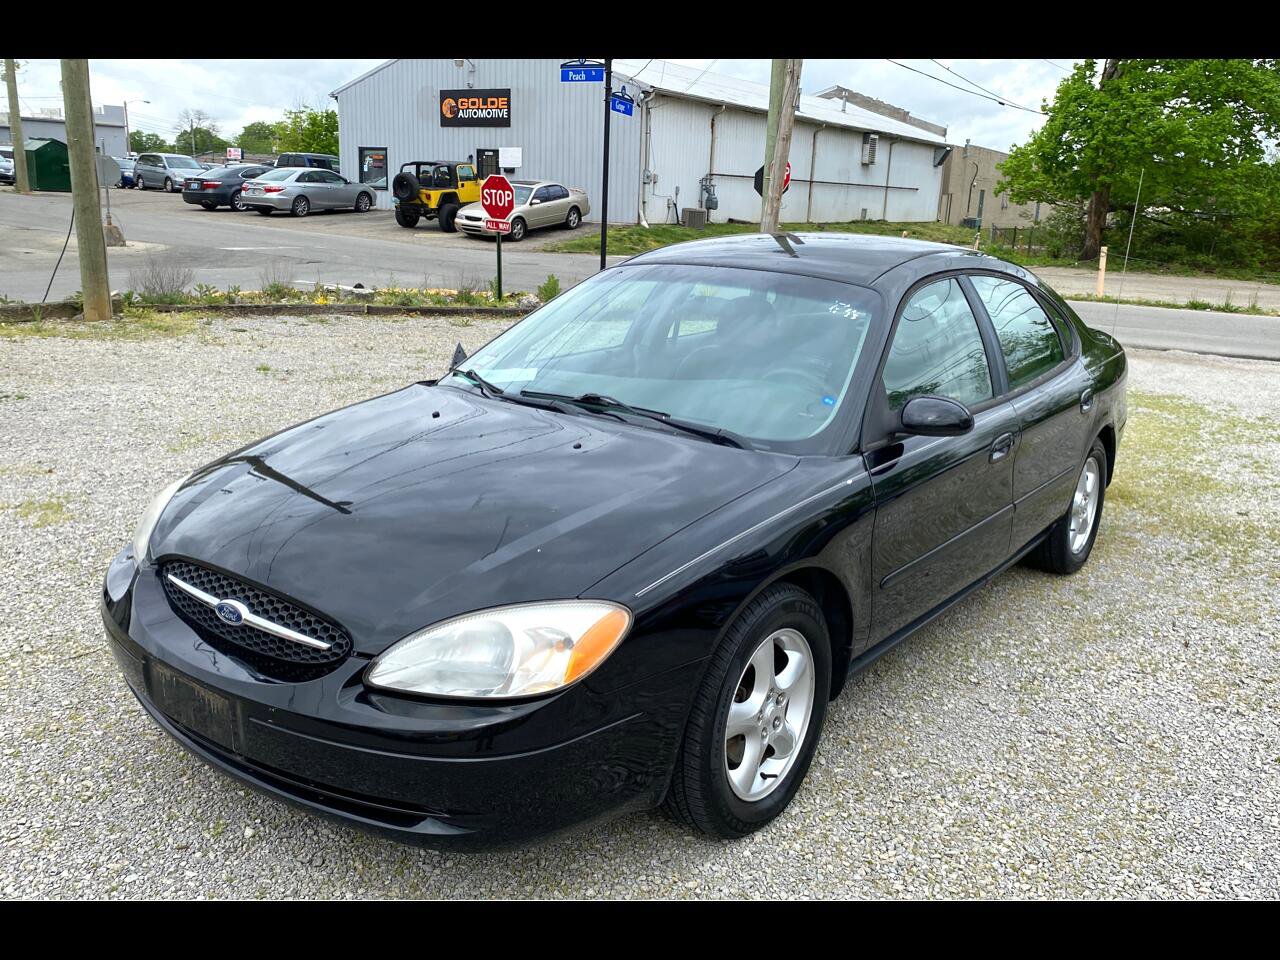 Used 2001 Ford Taurus for Sale Right Now - Autotrader